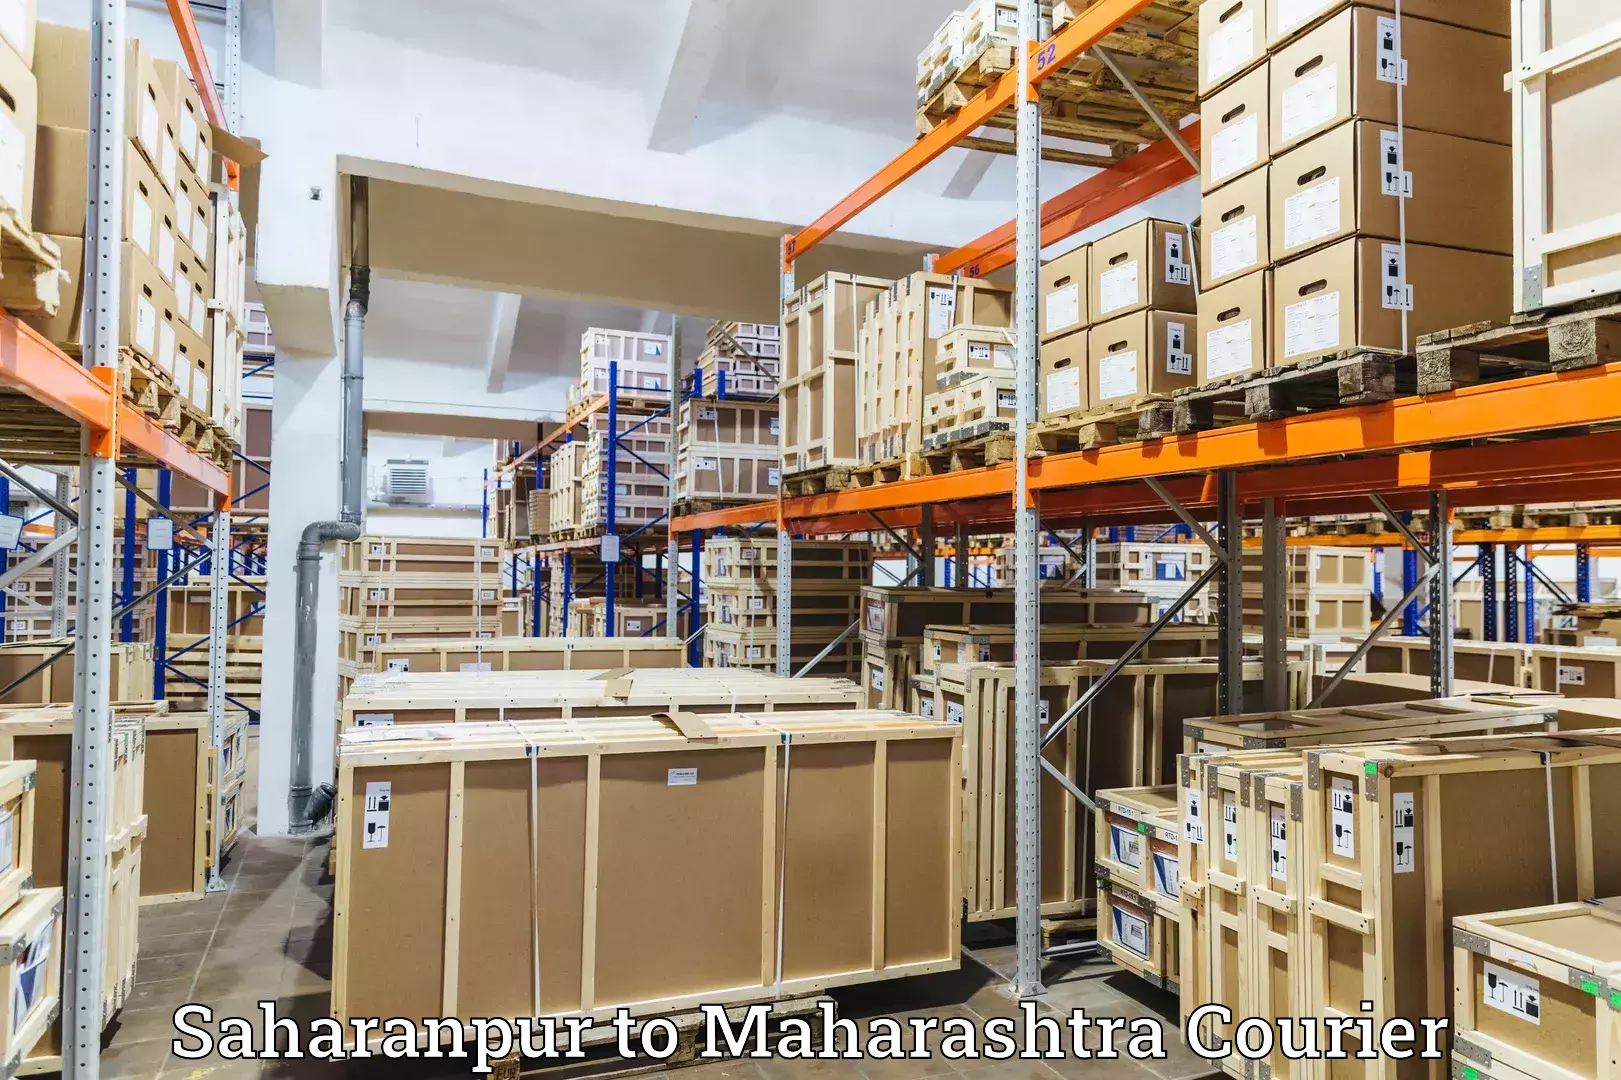 Parcel service for businesses in Saharanpur to Maharashtra